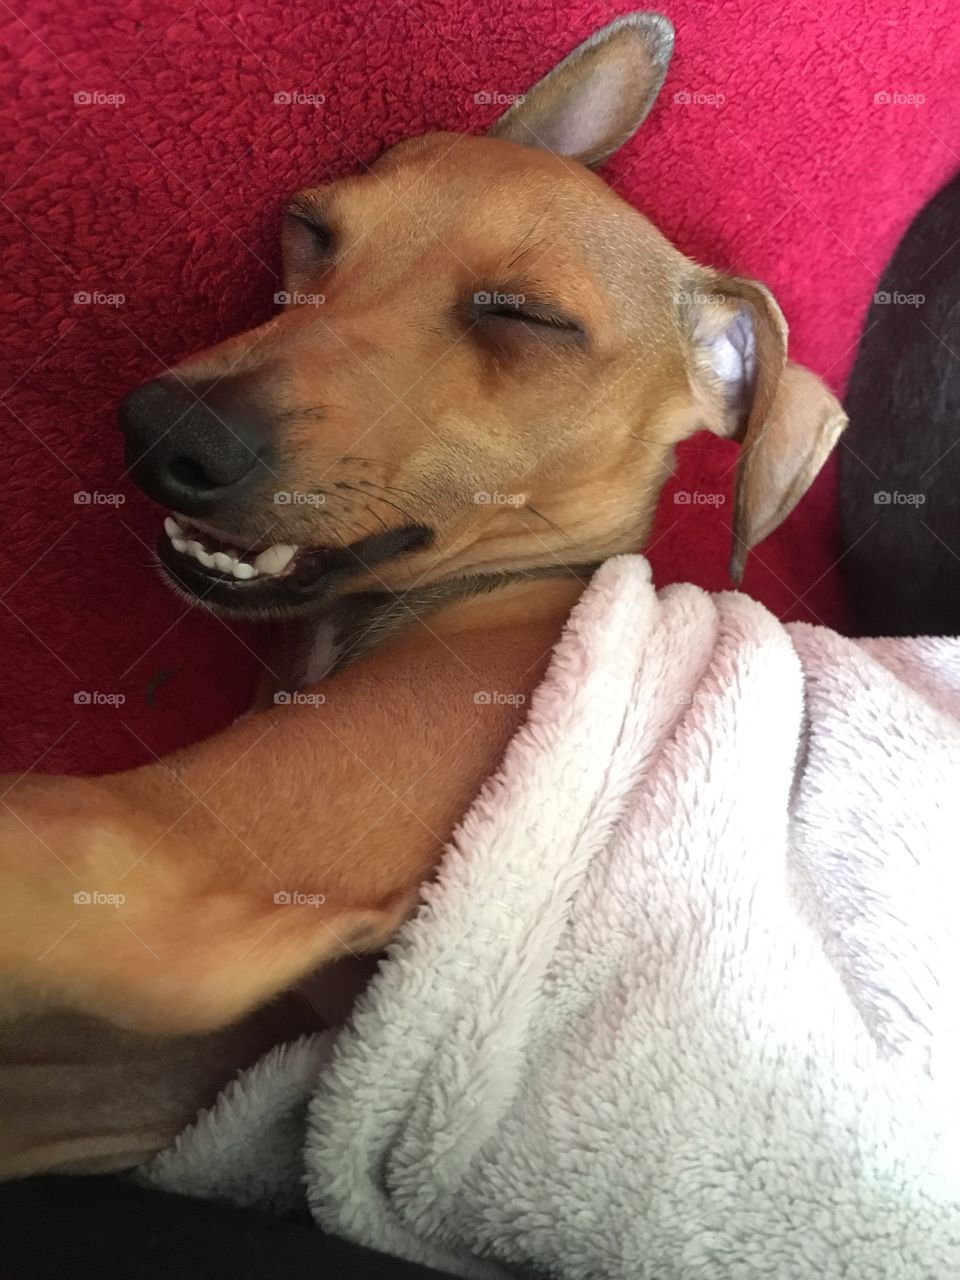 Amber the Italian greyhound puppy asleep and smiling, showing her teeth while relaxing on the sofa